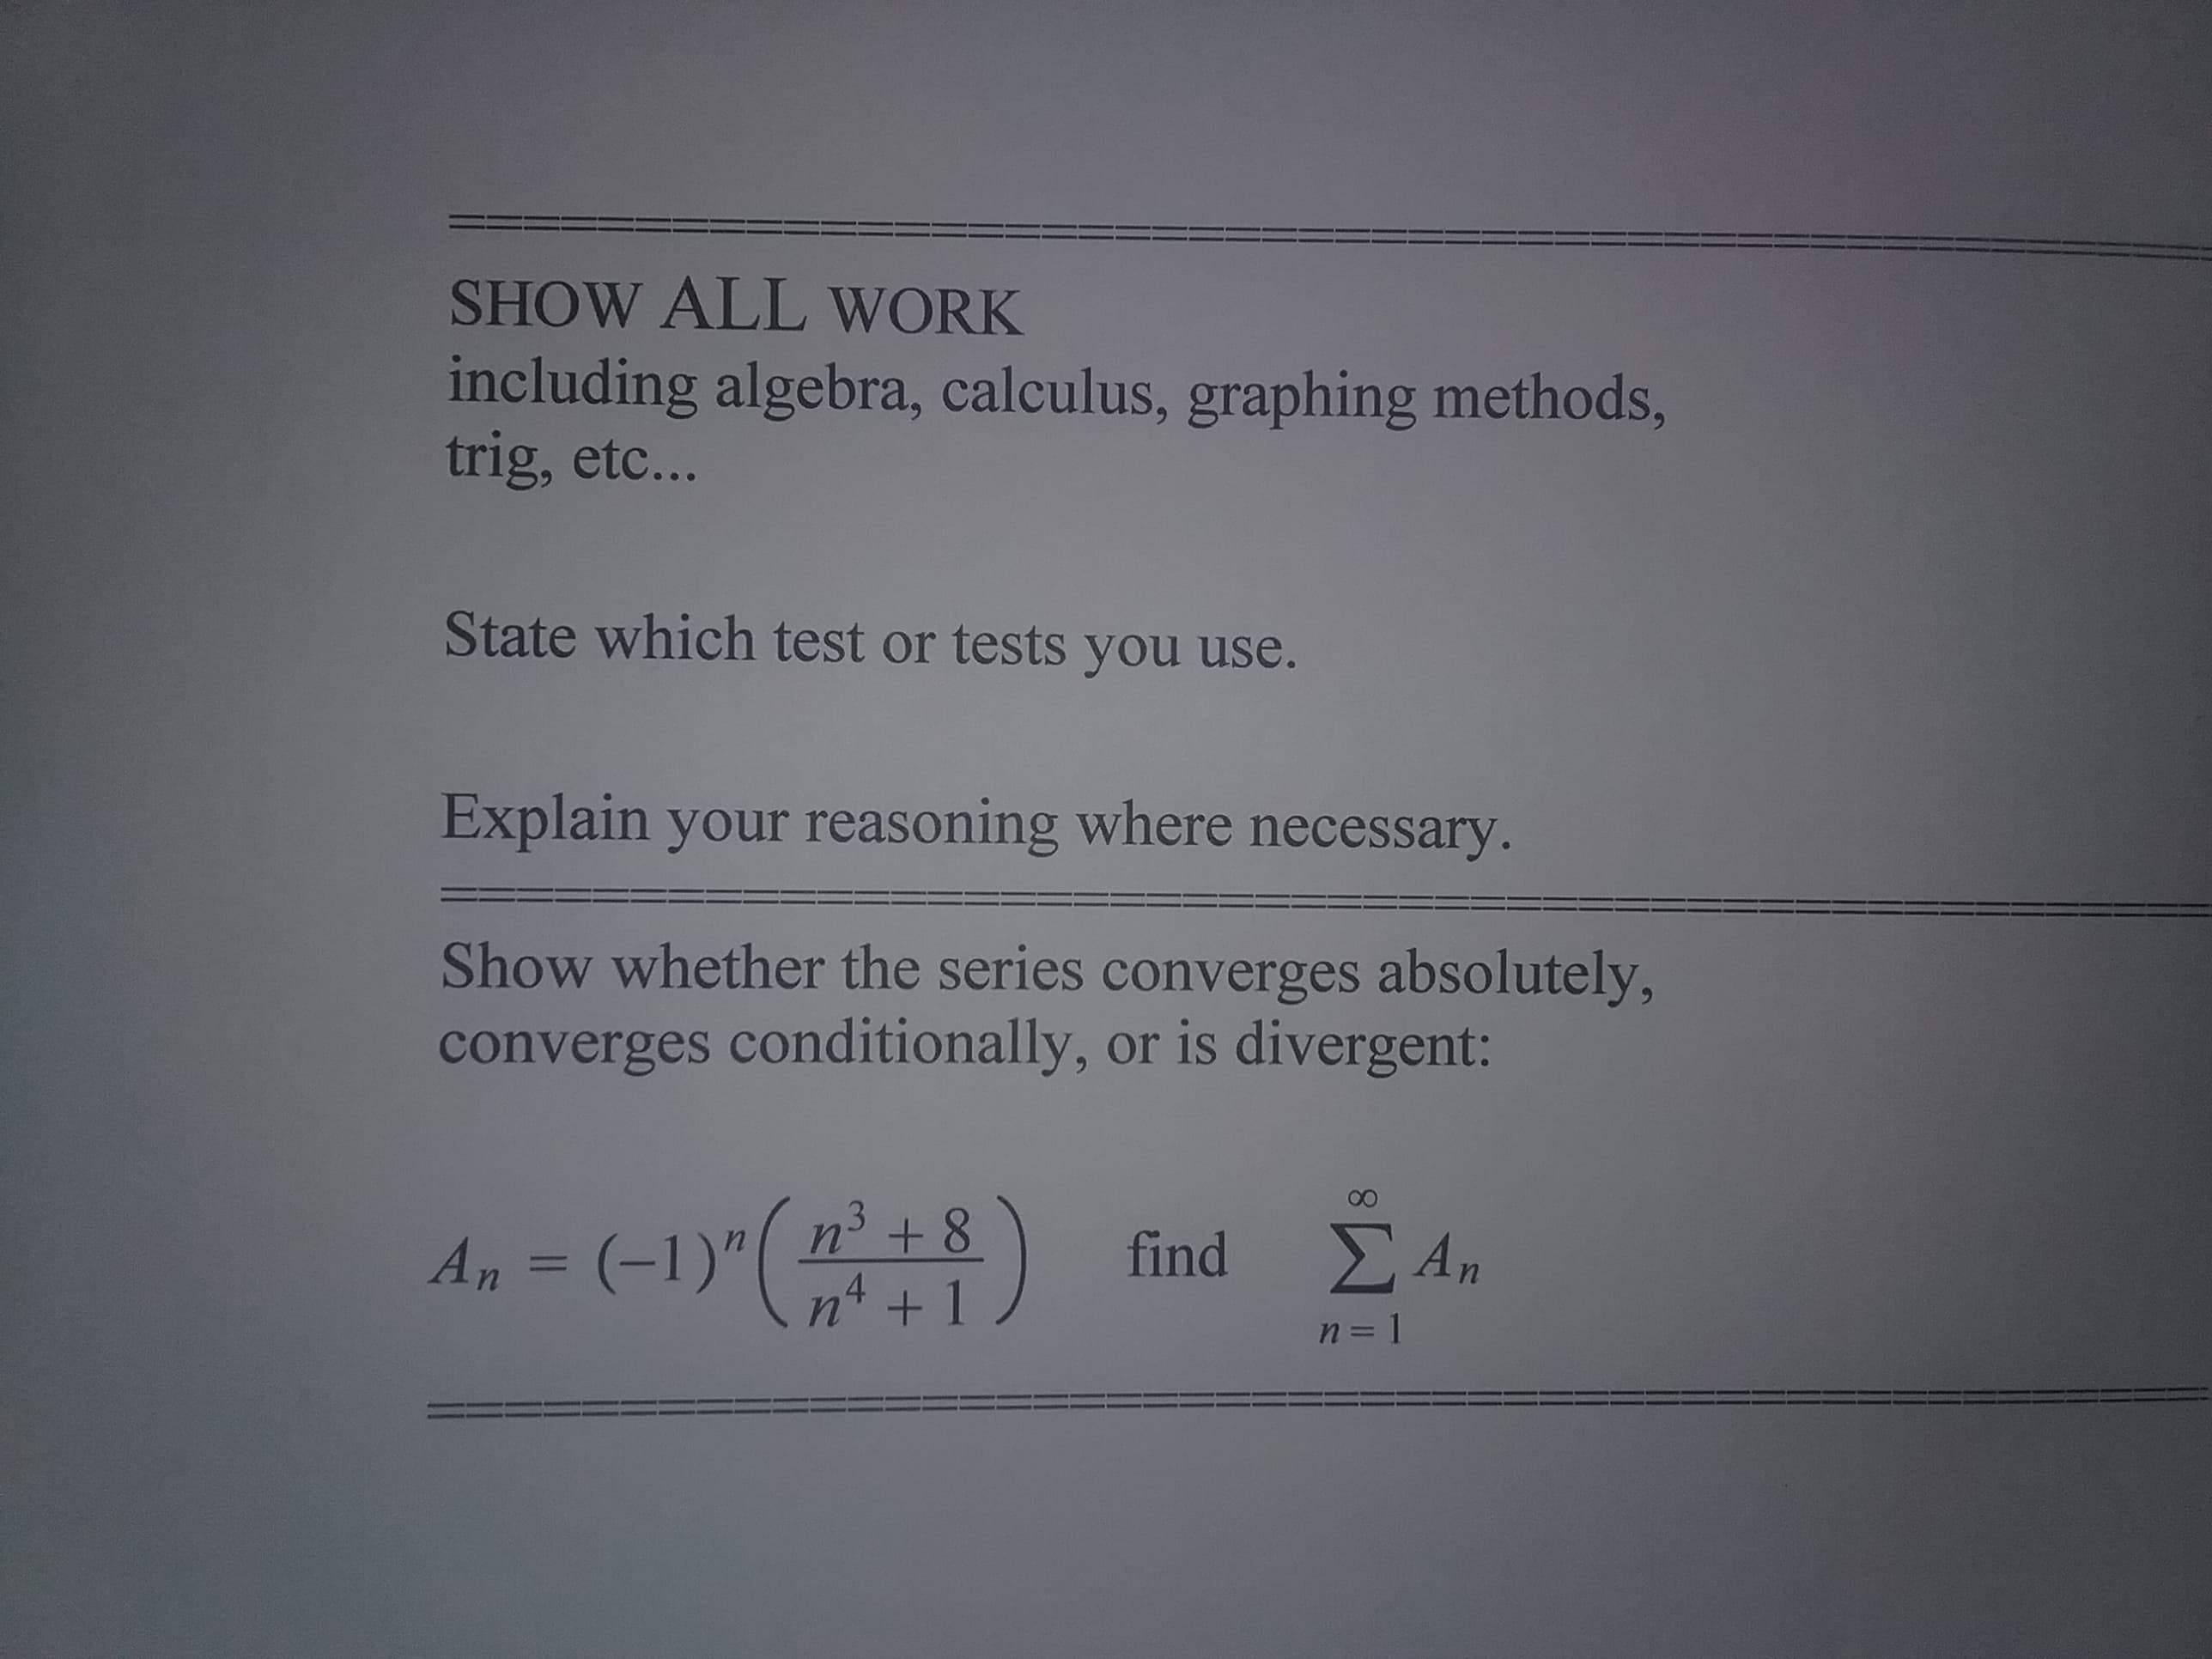 Show whether the series converges absolutely,
converges conditionally, or is divergent:
00
An = (-1)"(8)
n' +8
n4 +1
E An
find
%3D
n = 1
